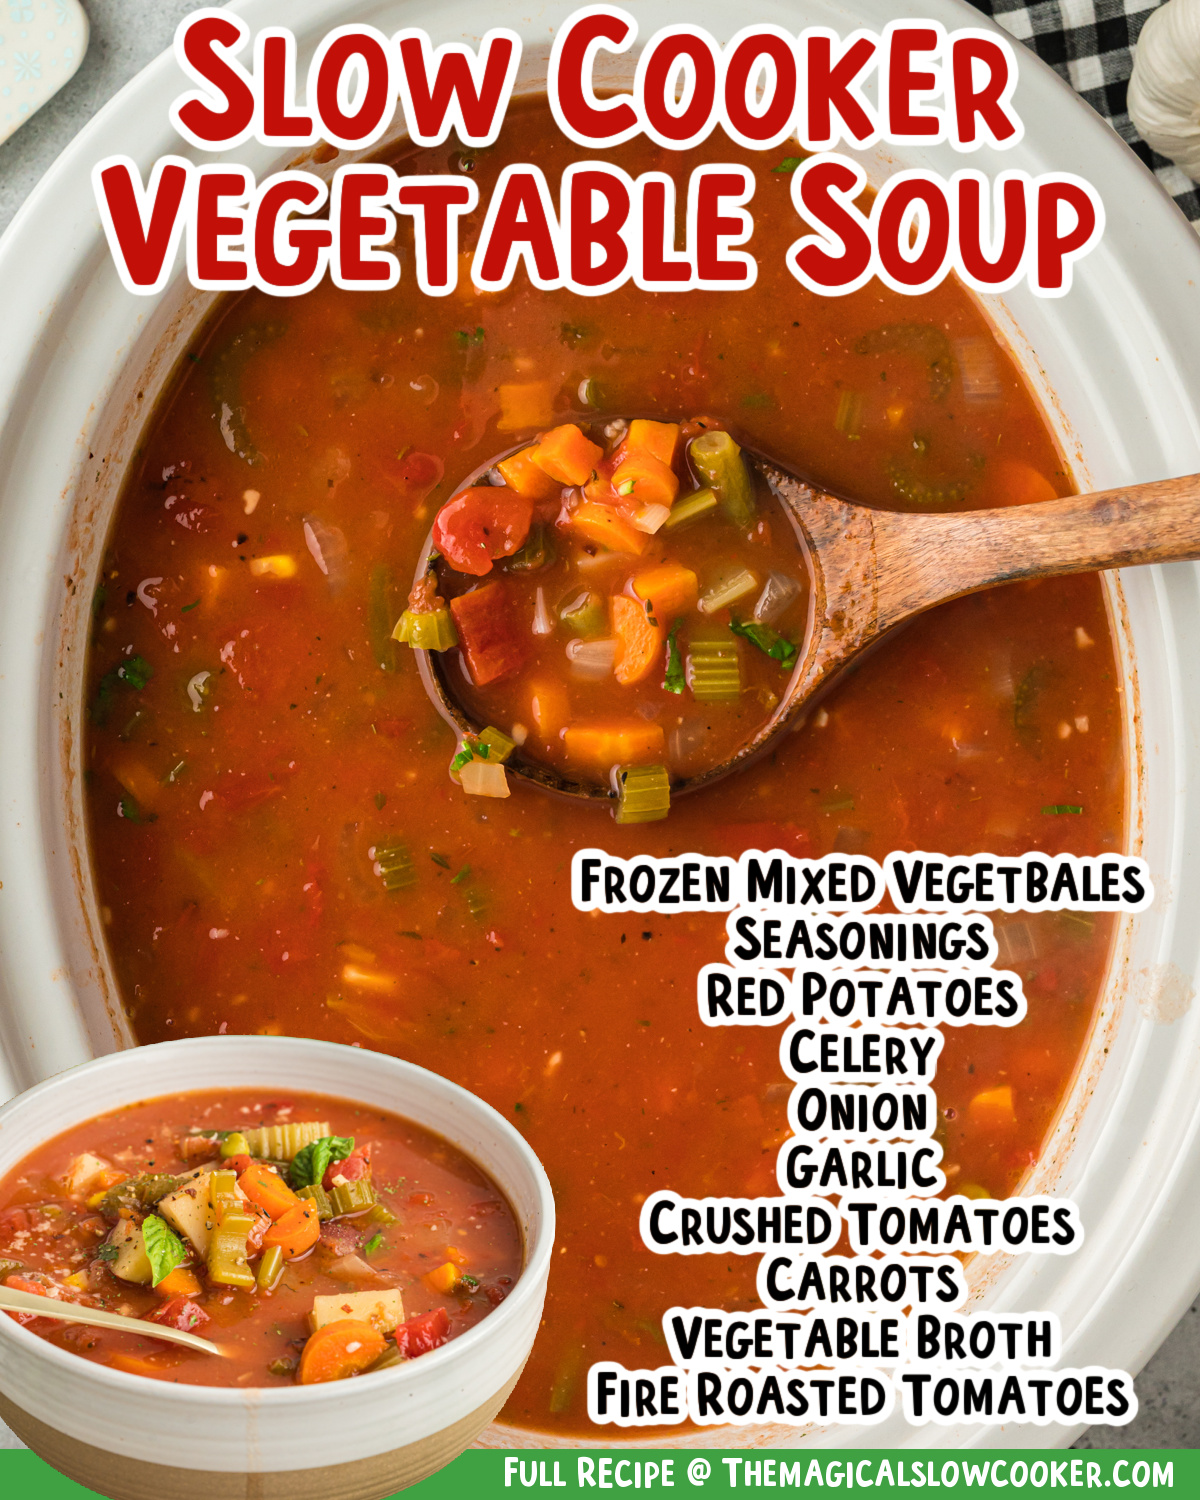 Vegetable soup images with text of the ingredients.